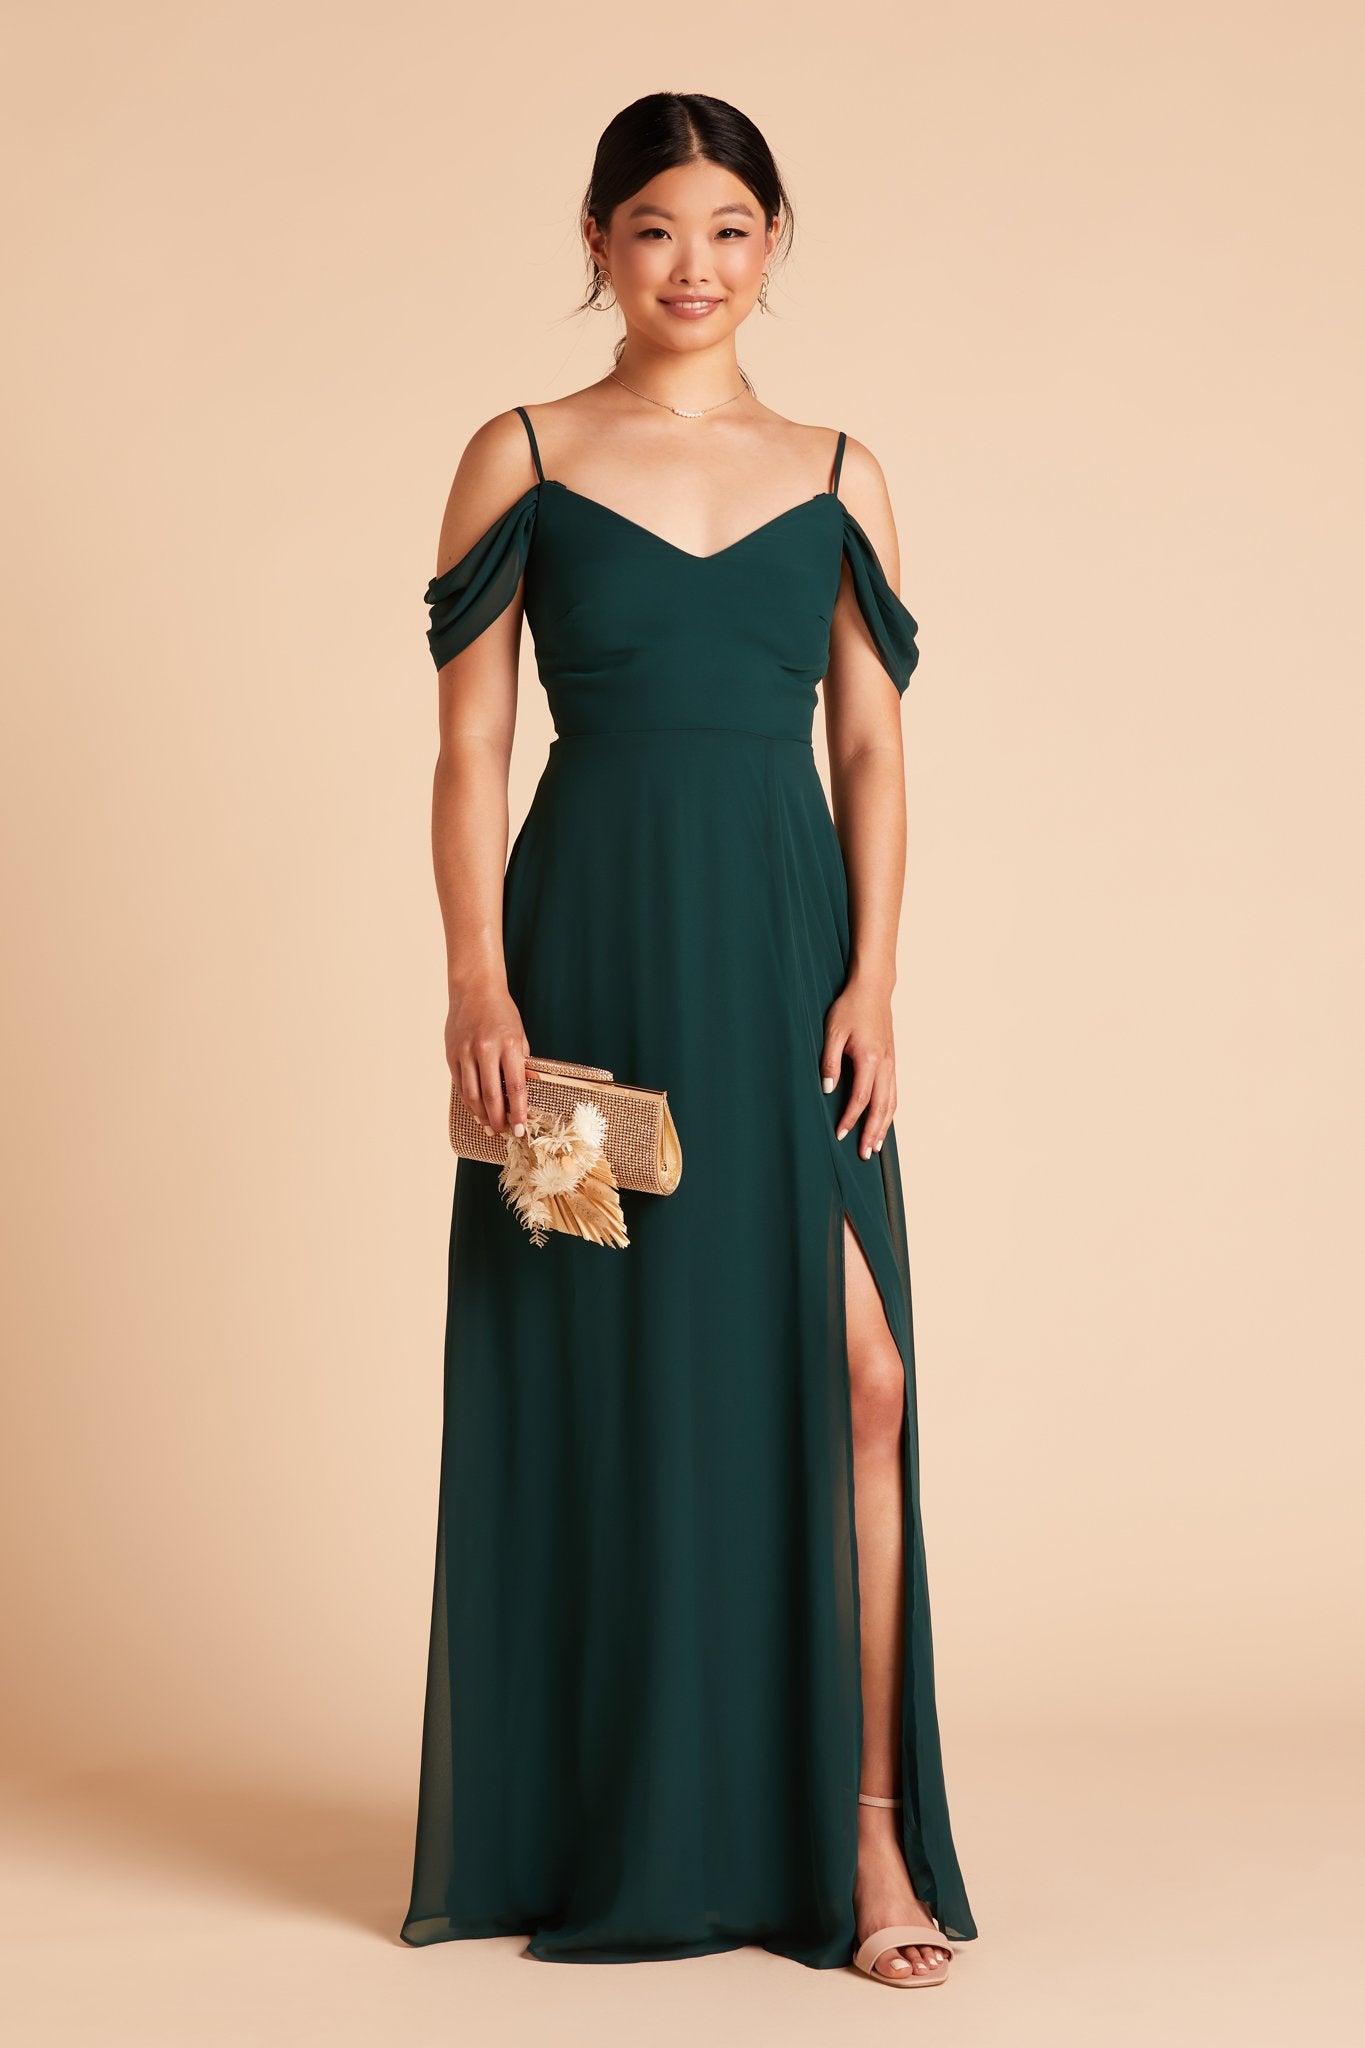 Front view of the floor-length Devin Convertible Bridesmaid Dress in emerald chiffon flaunts the optional thigh-high slit over the left leg as well as the detachable sleeve draping over the upper arms.